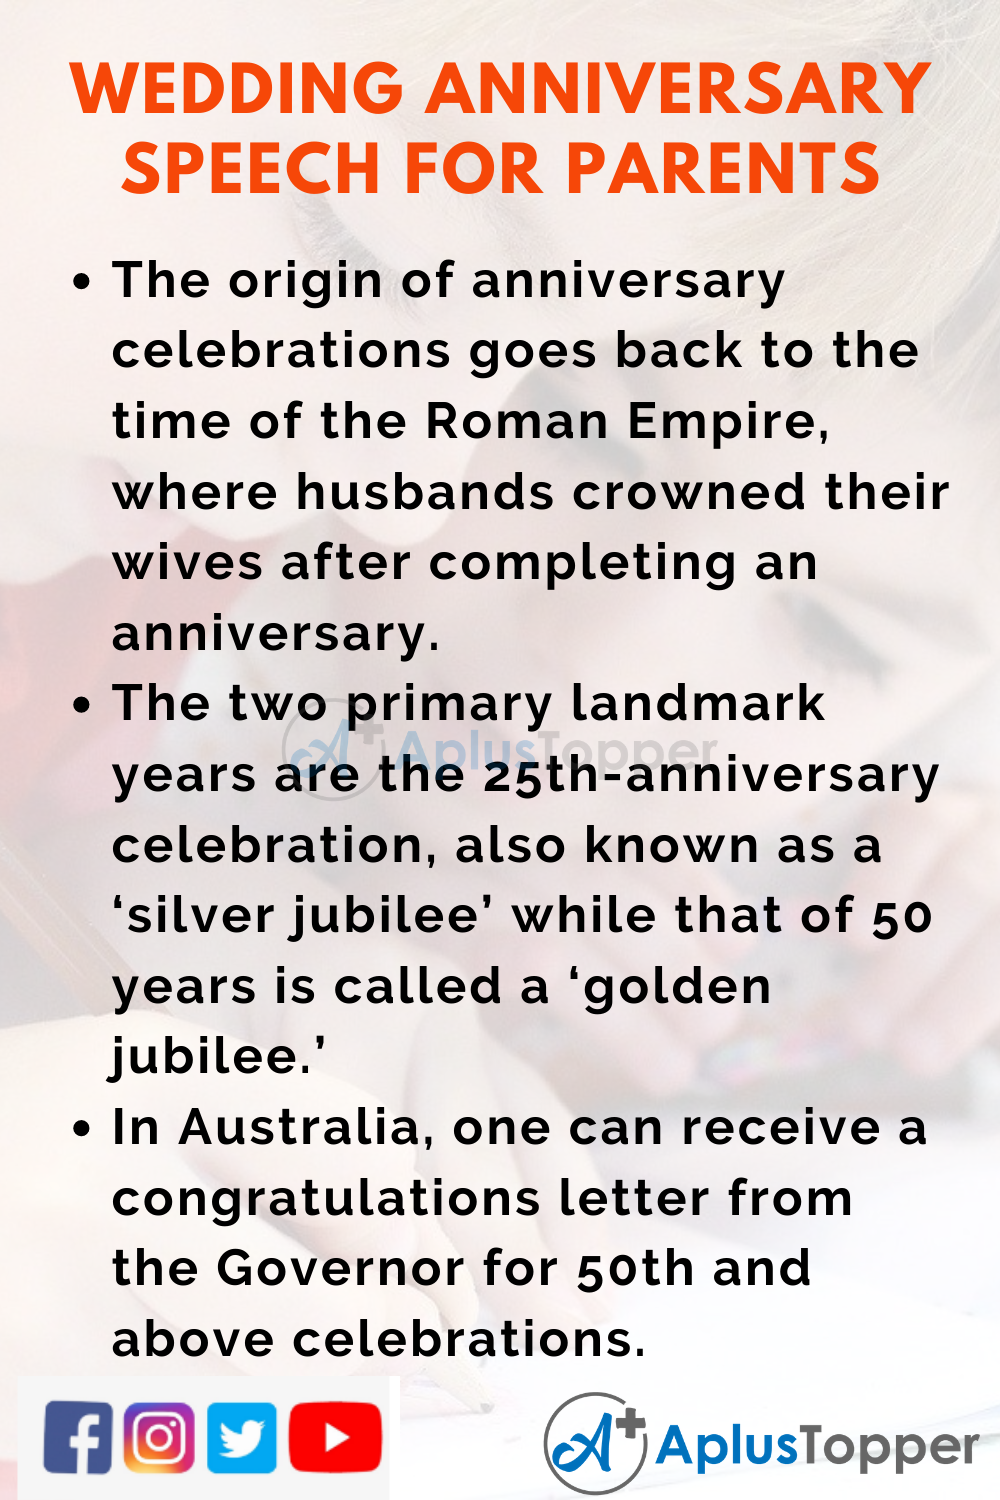 10 Lines On Wedding Anniversary Speech for Parents In English